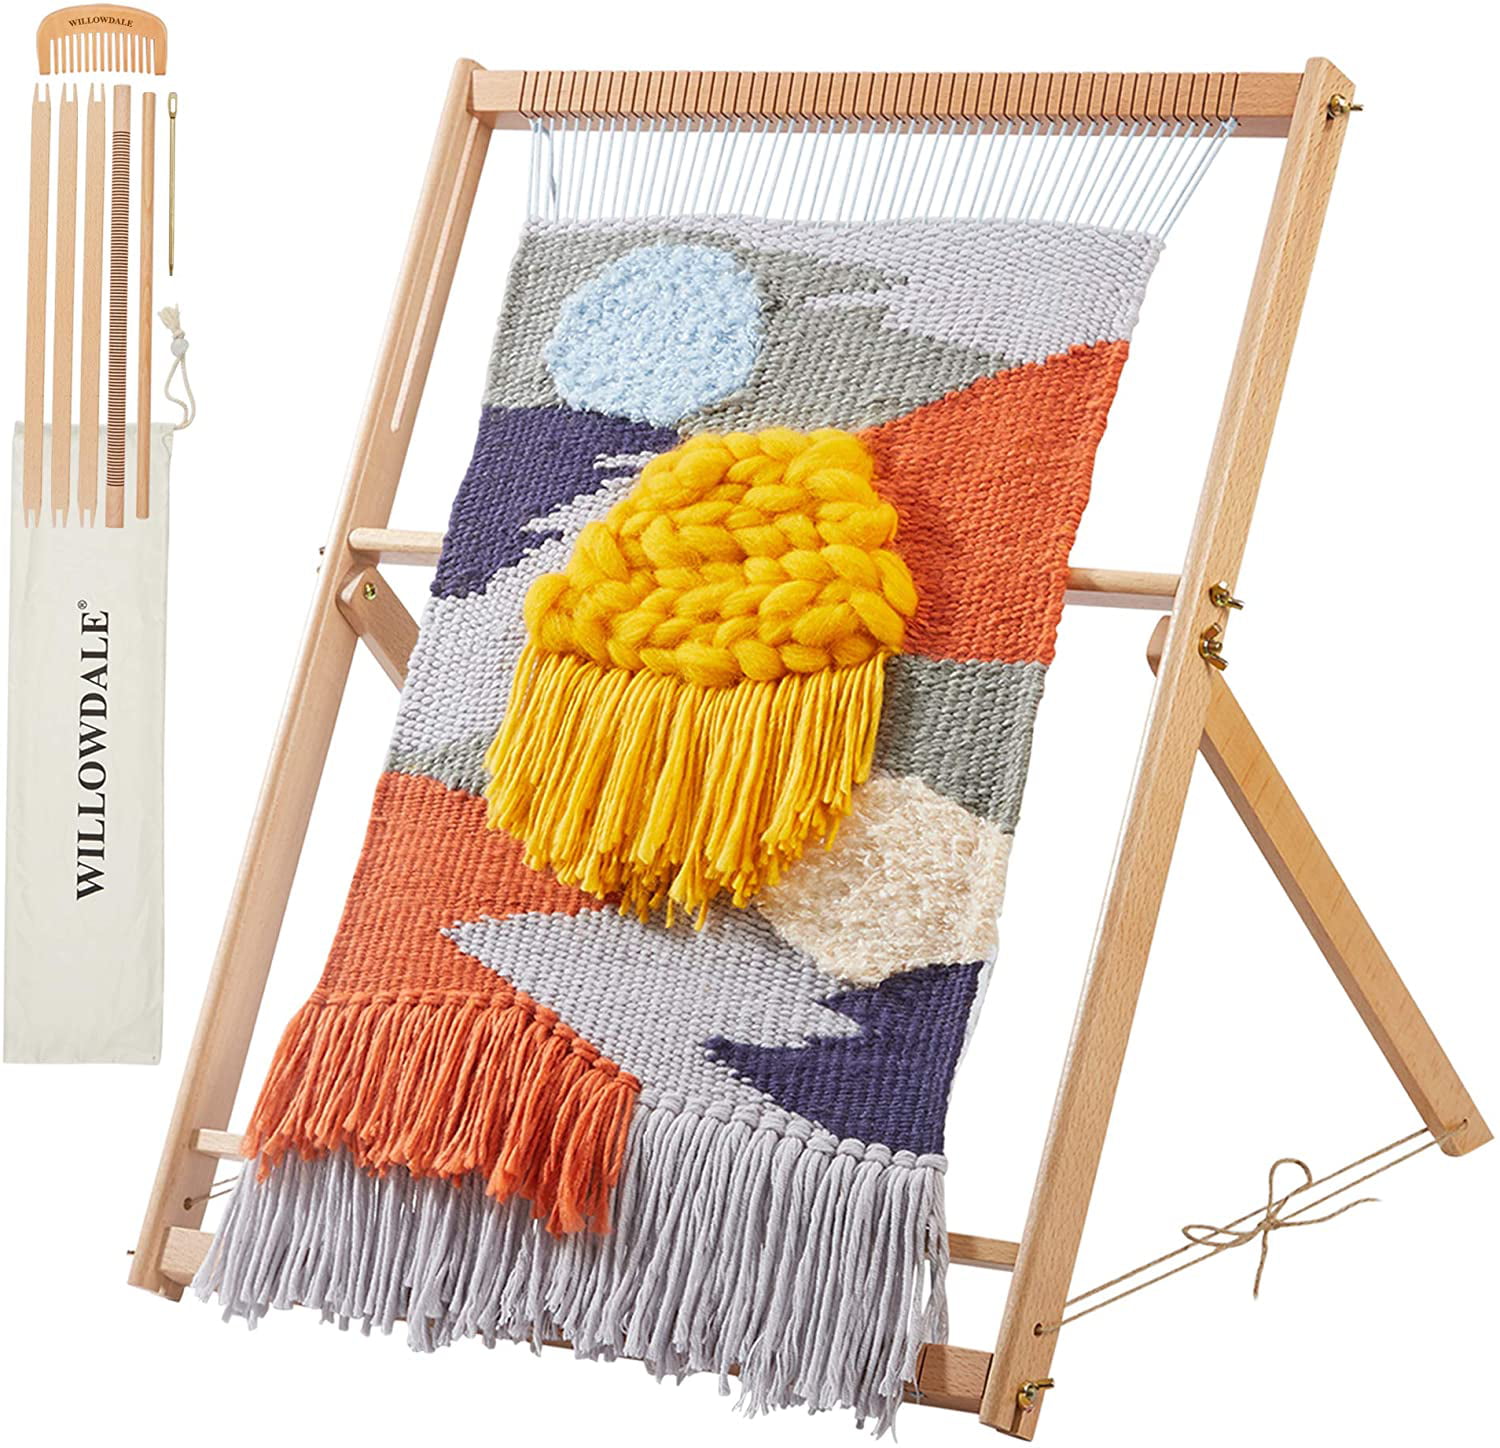 Details about   23.6"H x 21.3"W Wooden Multi-Craft Weaving Loom Wooden Looming Set Crafts US 